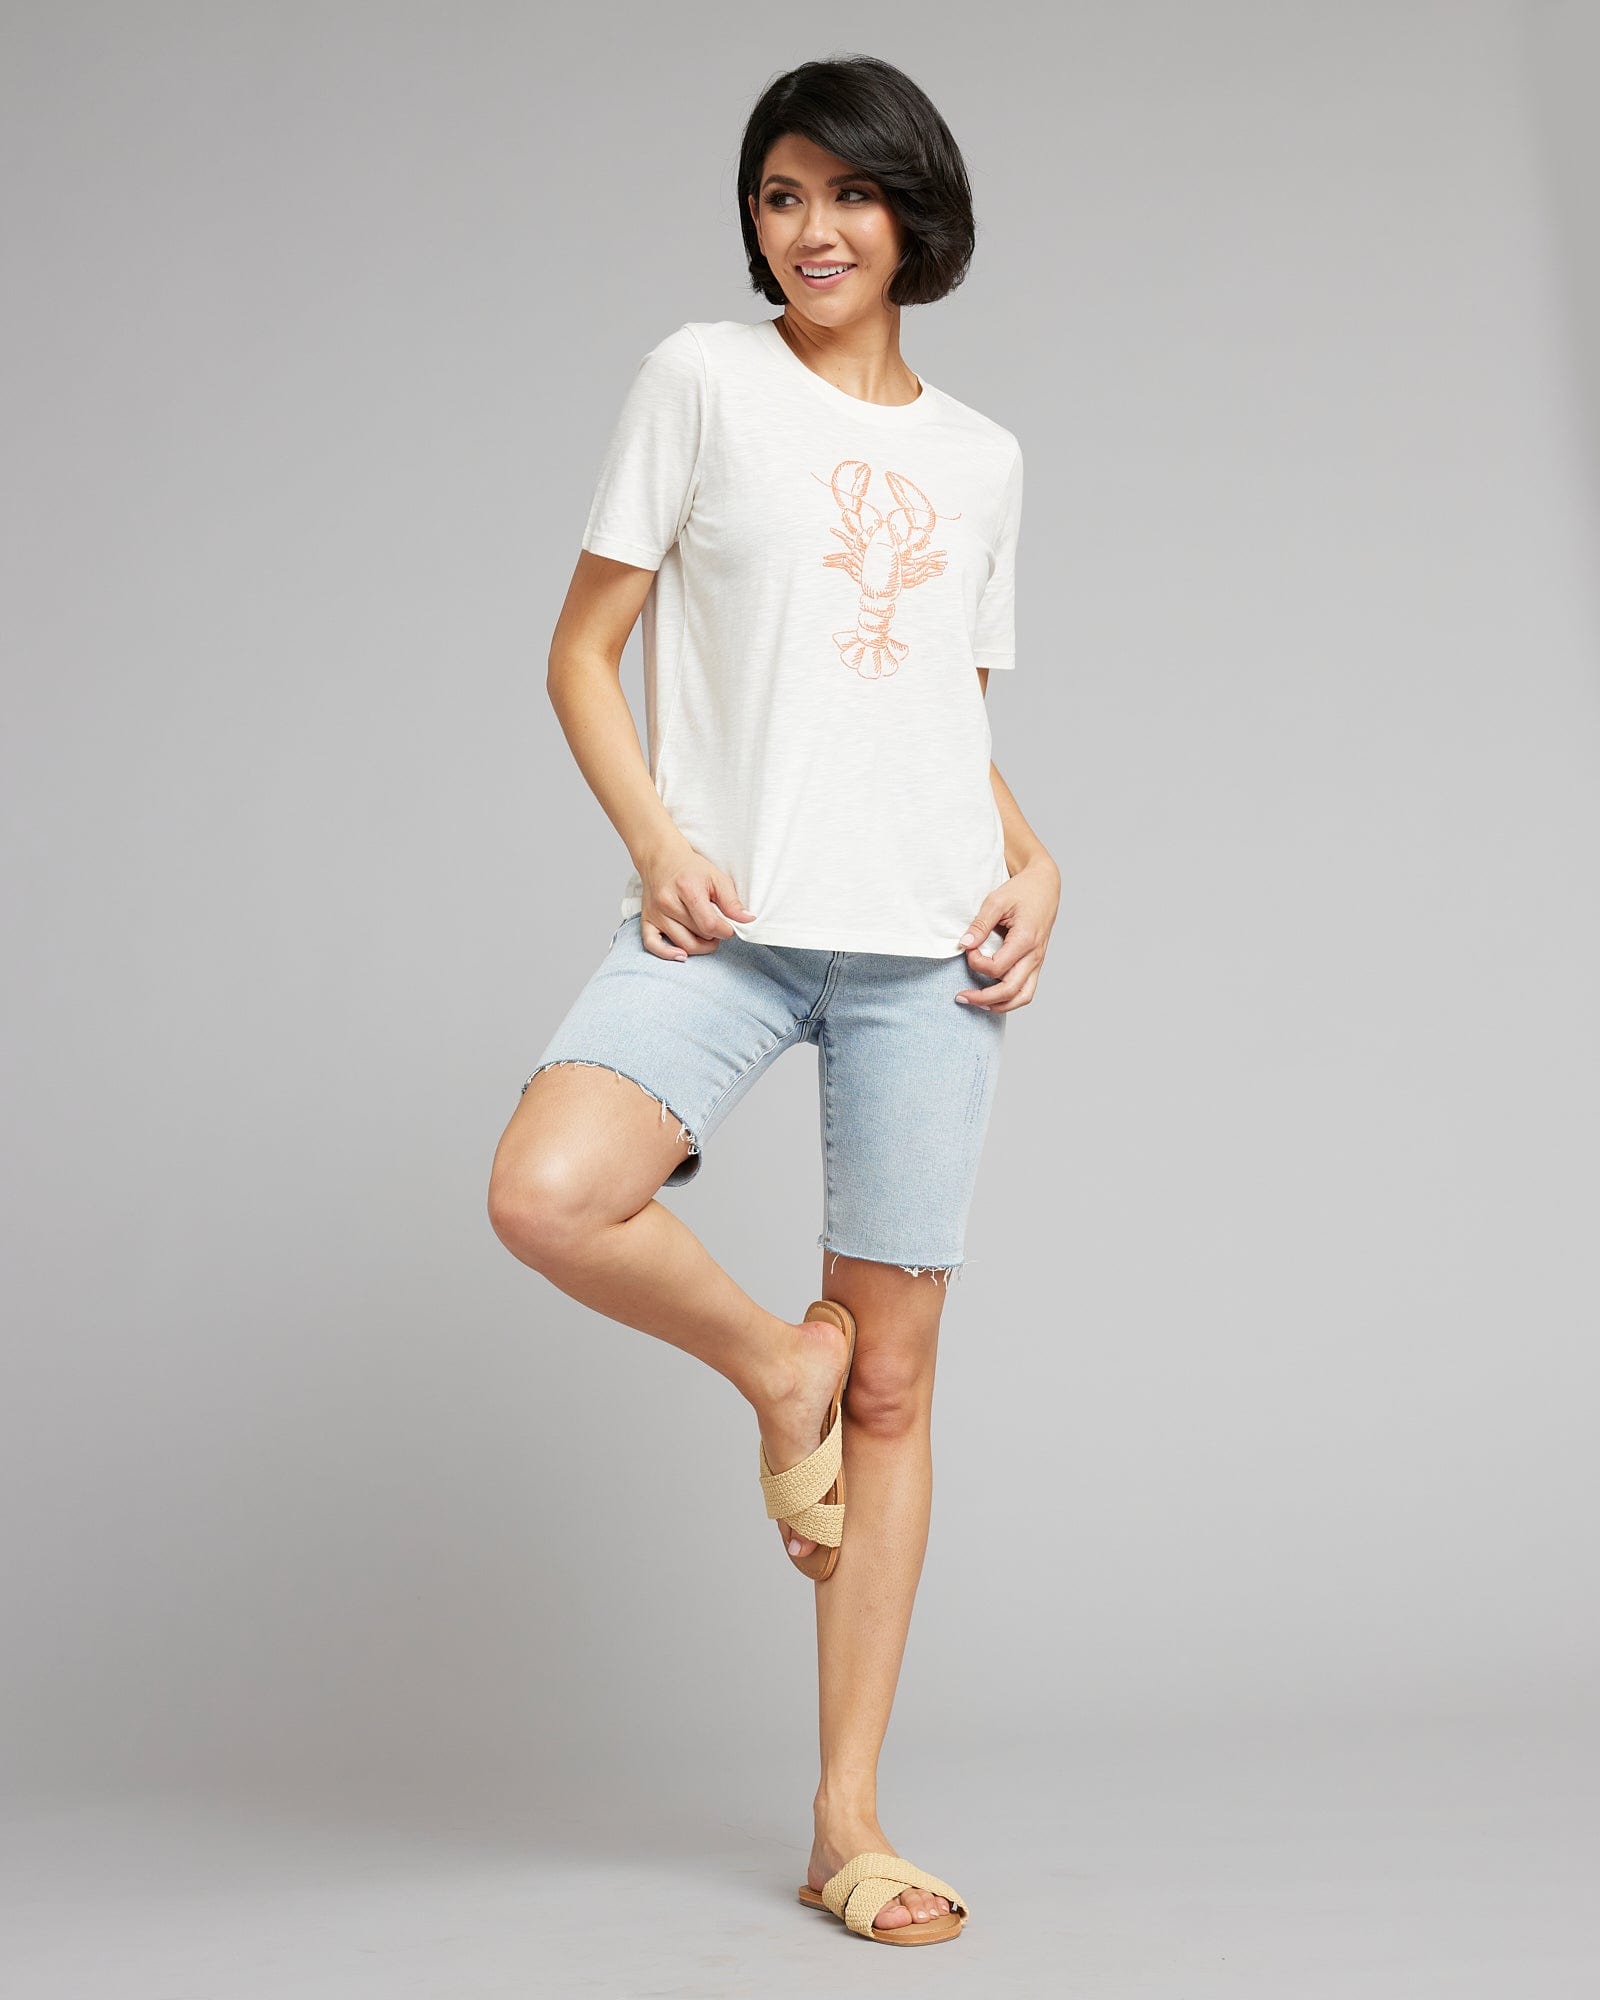 Woman in a white short sleeved graphic tee with a lobster on the front